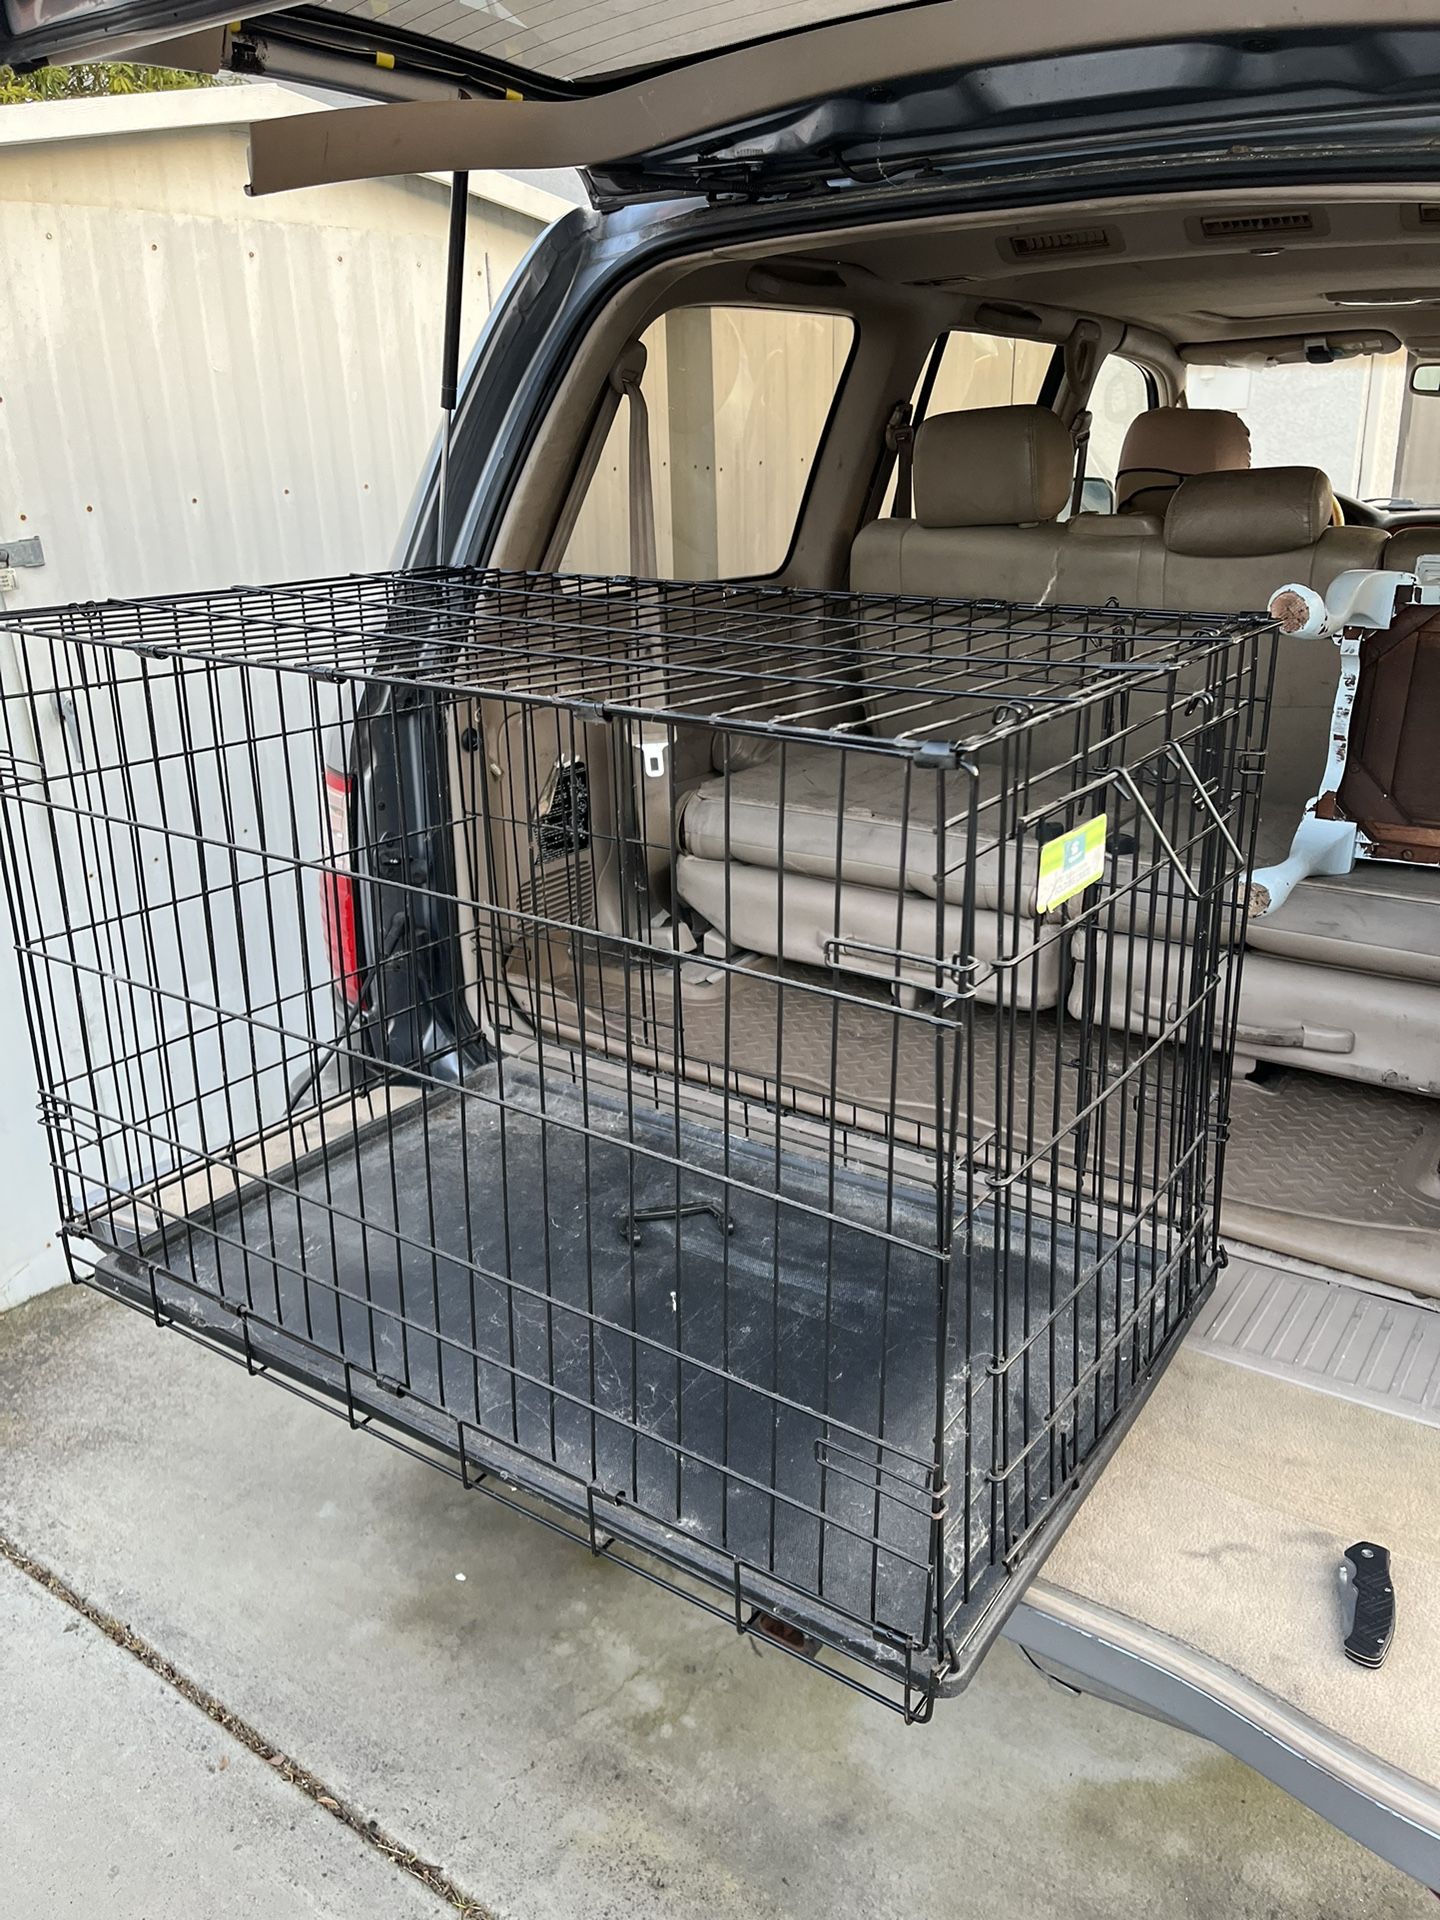 Dog Crate, Collapsible